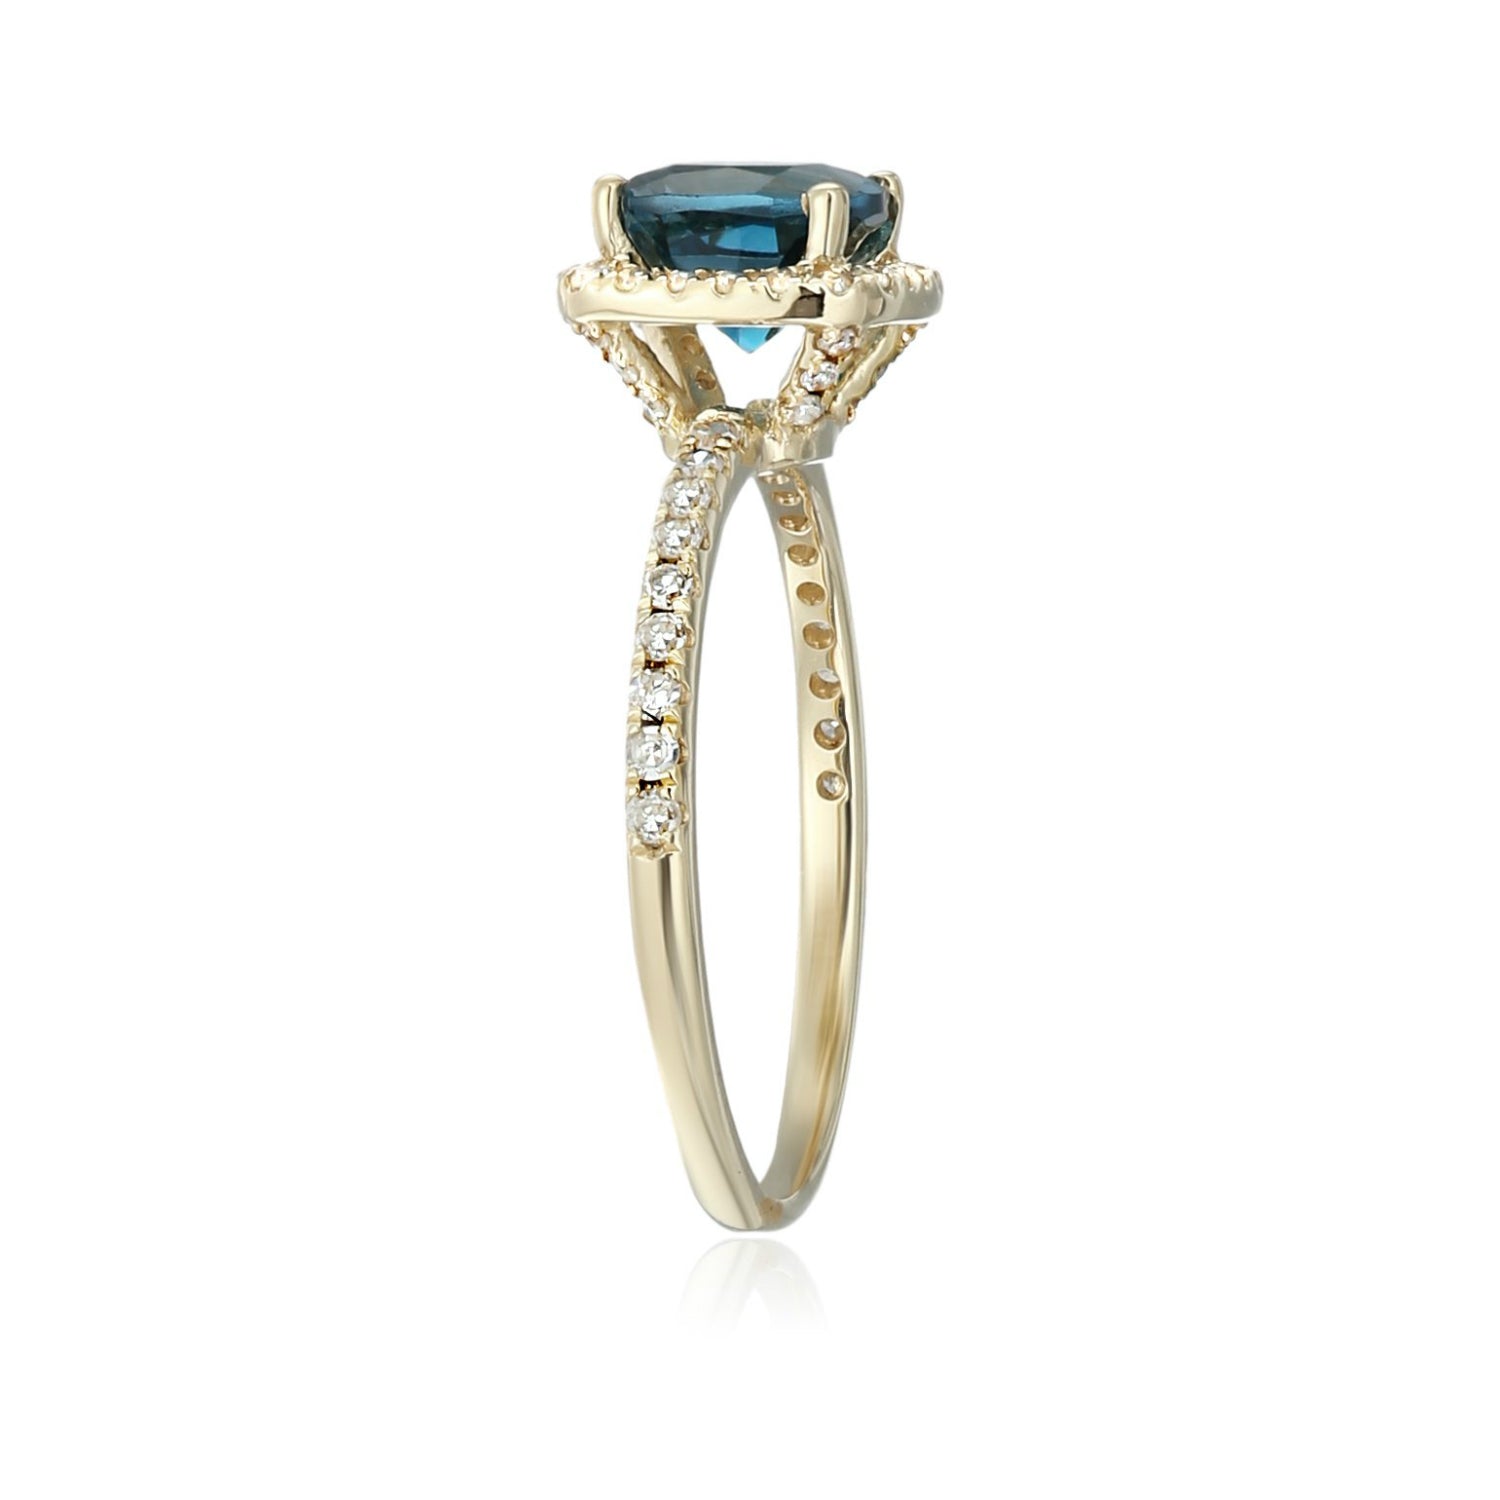 10k Yellow Gold London Blue Topaz and Diamond Cushion Halo Engagement Ring (1/4cttw, H-I Color, I1-I2 Clarity), - pinctore